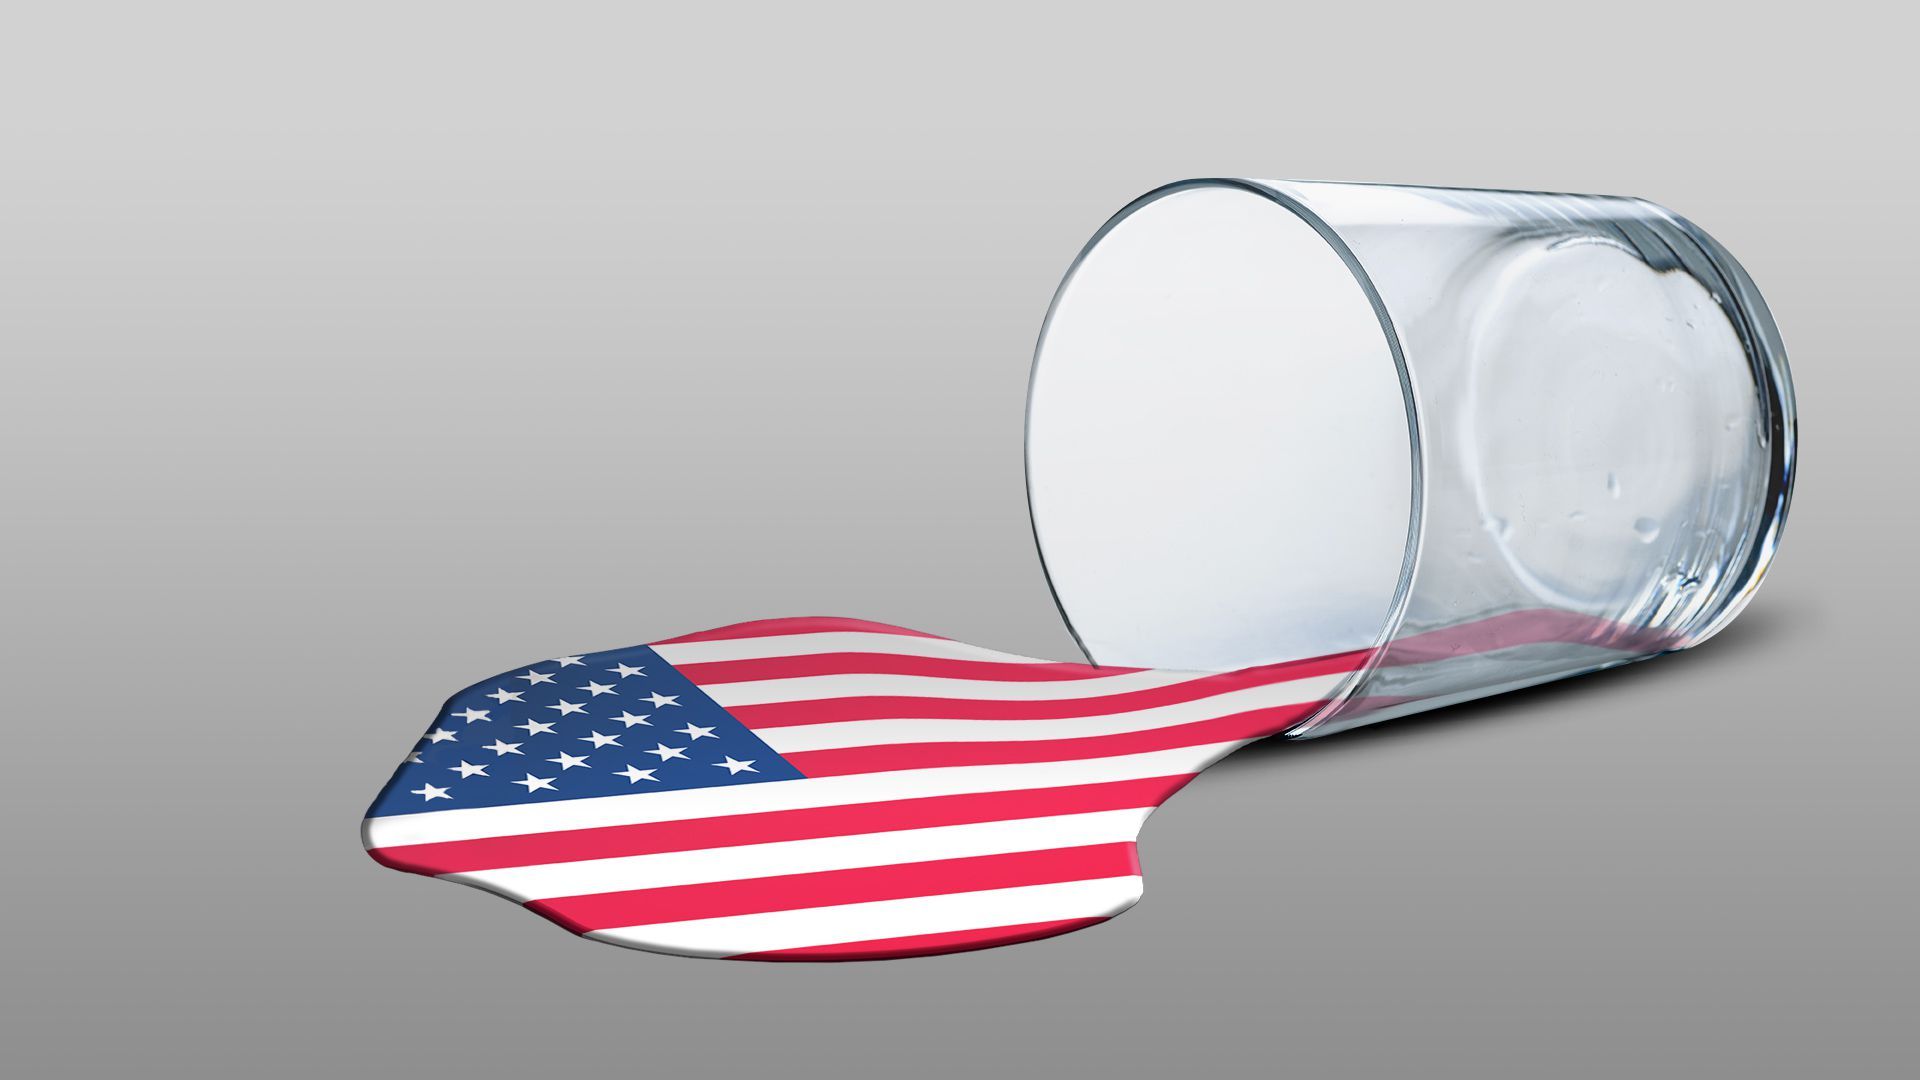 Illustration of a tipped glass with liquid forming the American flag spilled out